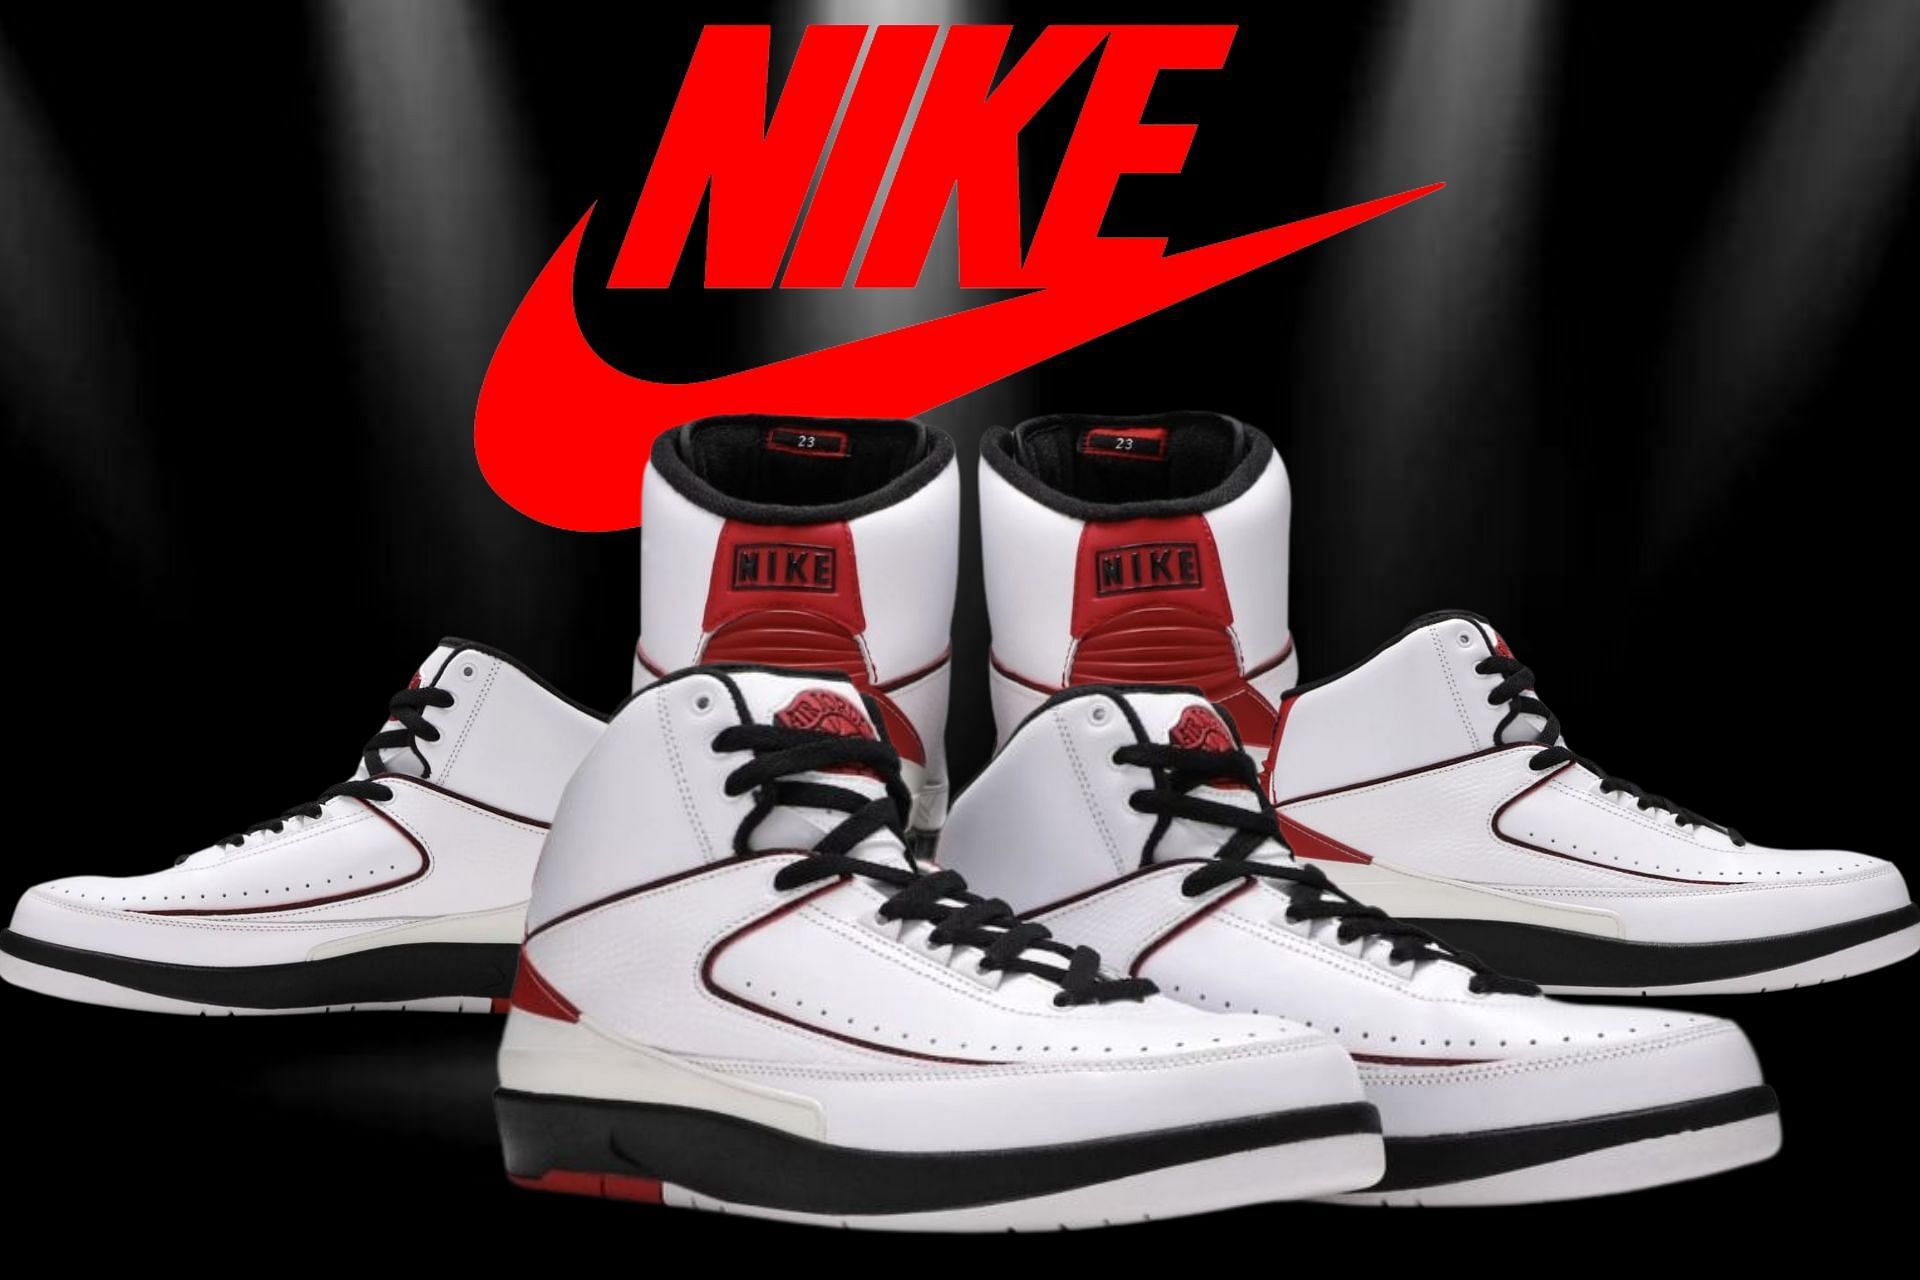 Where to buy Air Jordan 2 OG Chicago colorway? Price, release date